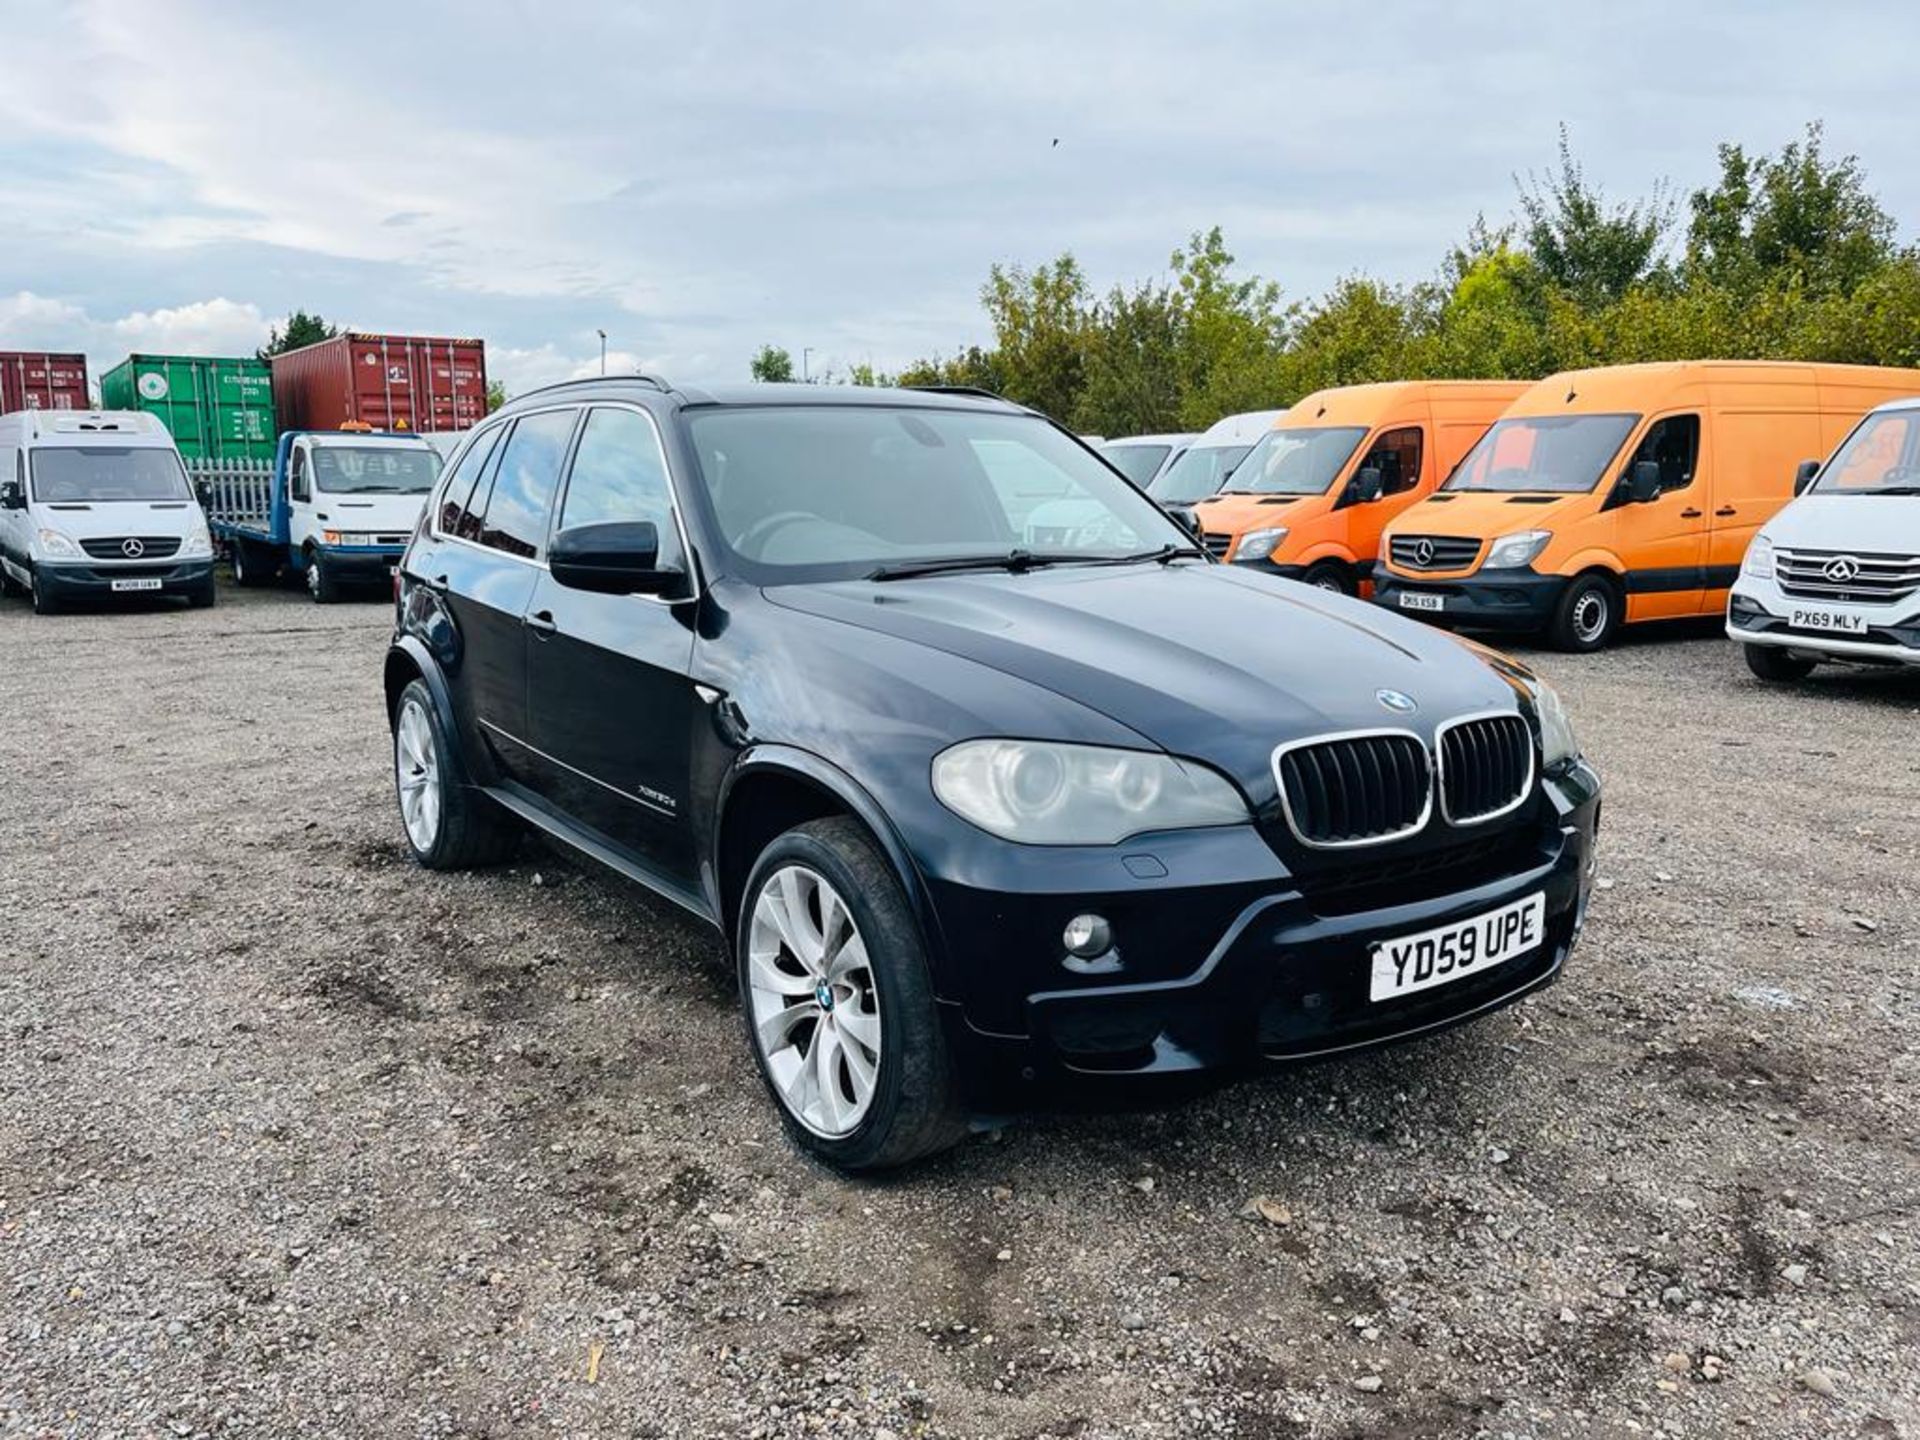 ** ON SALE ** BMW X5 XDrive MSport 30D A 3.0 2009 "59 Reg" - Automatic - Air Conditioning